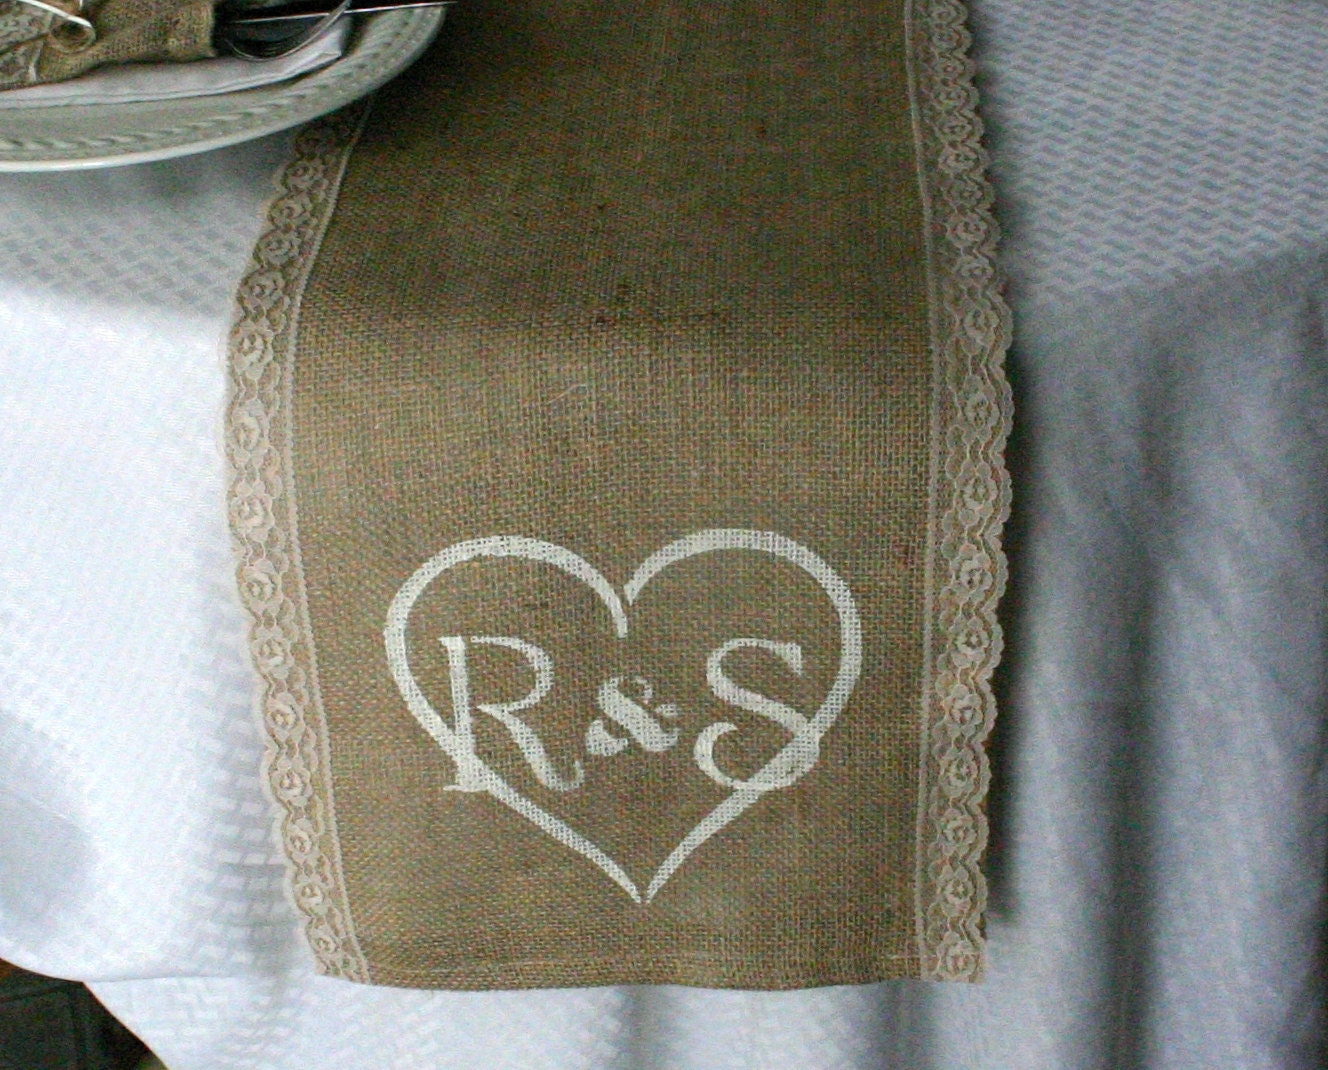 lace table and monogrammed lace runners Accessories: runner Burlap runners, table  table